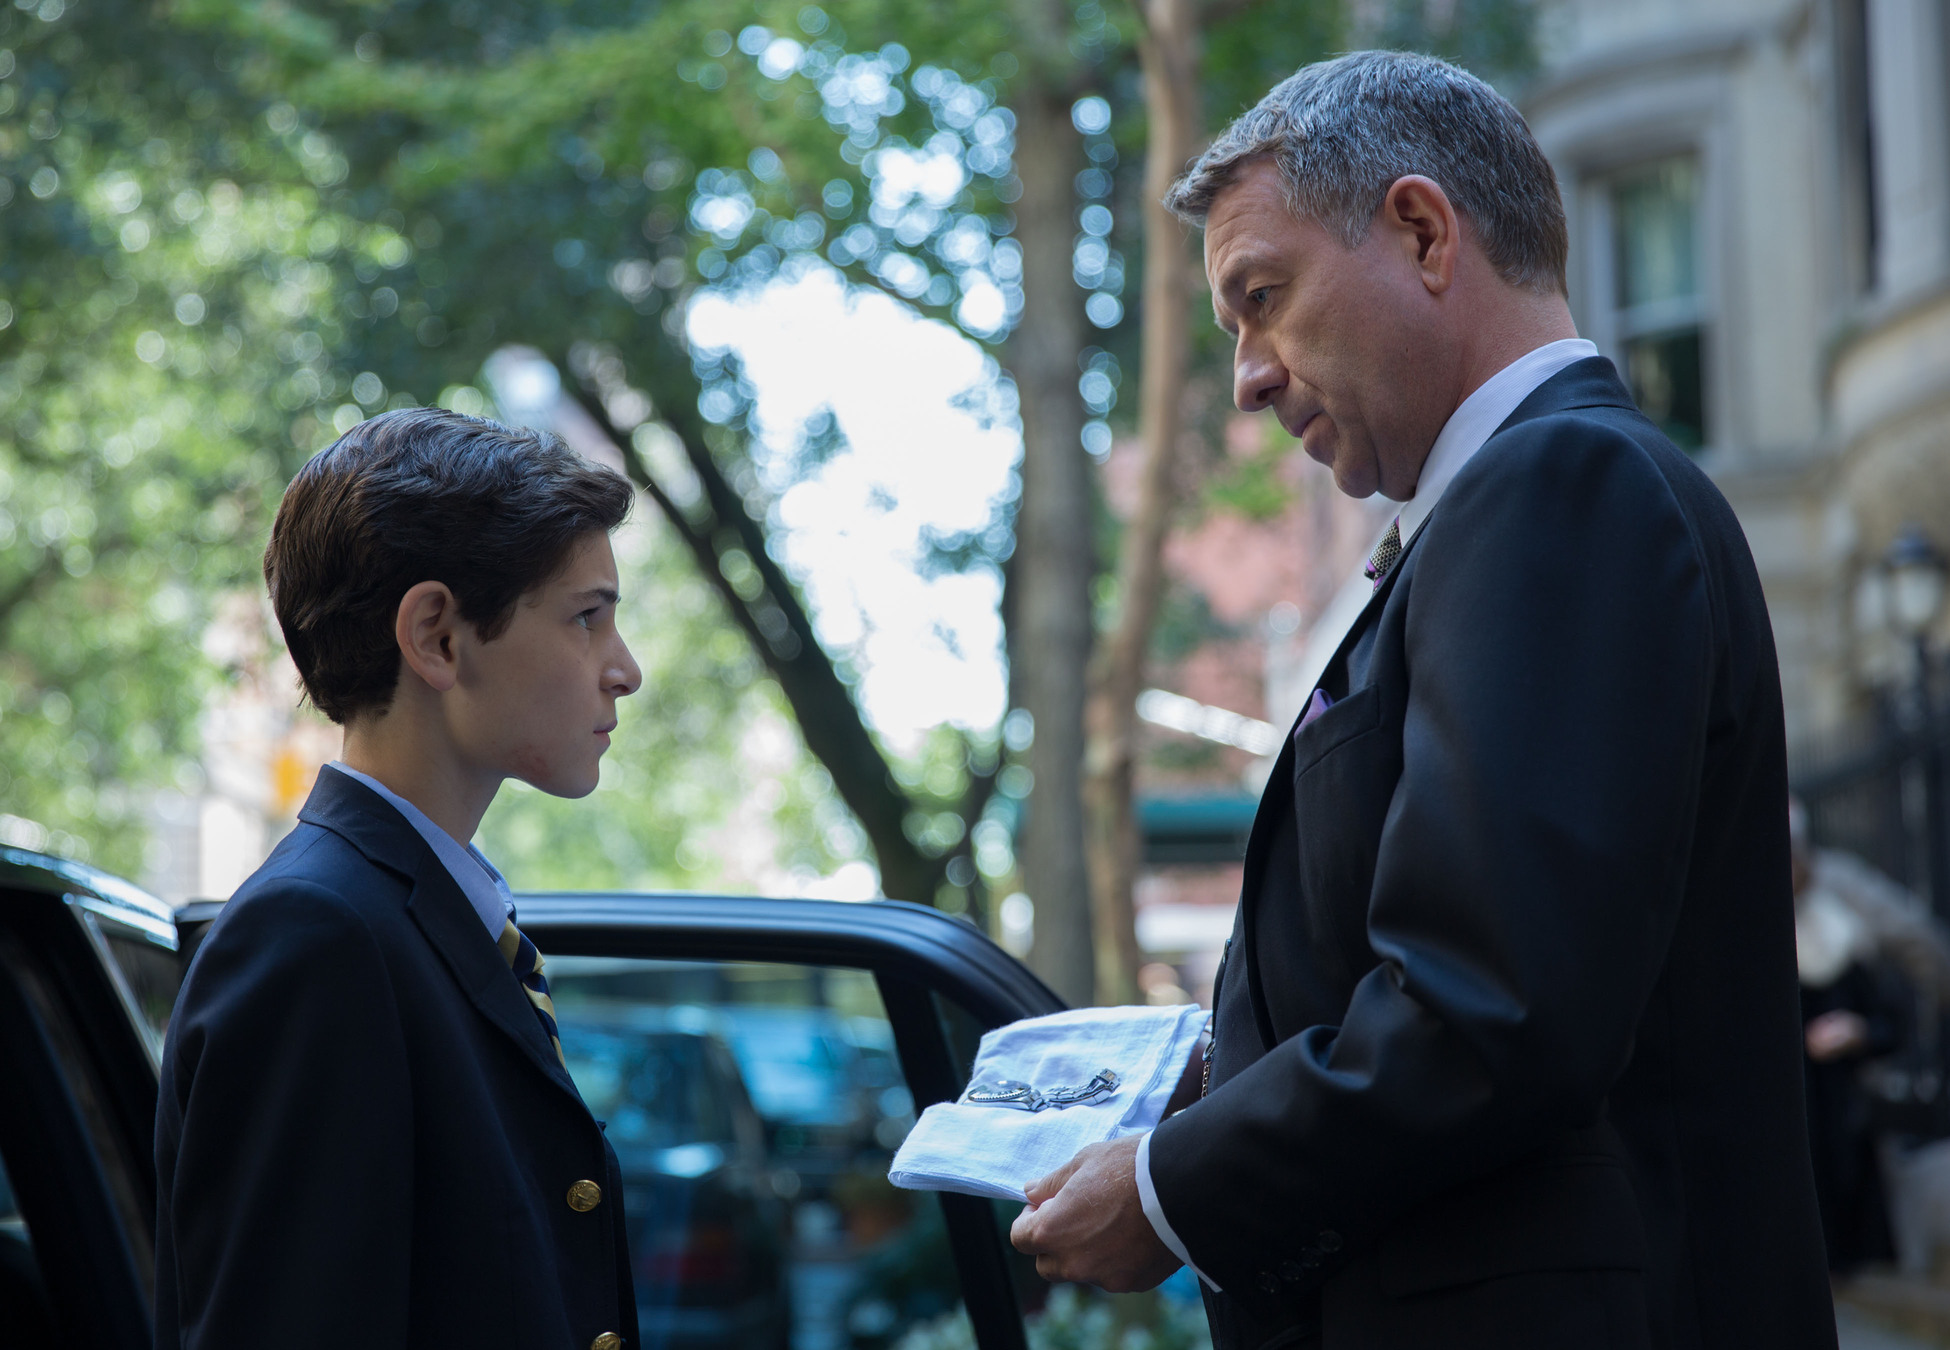 GOTHAM: Alfred (Sean Pertwee, R) presents Bruce (David Mazouz, L) with his father's watch in the "The Mask" episode of GOTHAM airing Monday, Nov. 10 (8:00-9:00 PM ET/PT) on FOX. Â©2014 Fox Broadcasting Co. Cr: Jessica Miglio/FOX